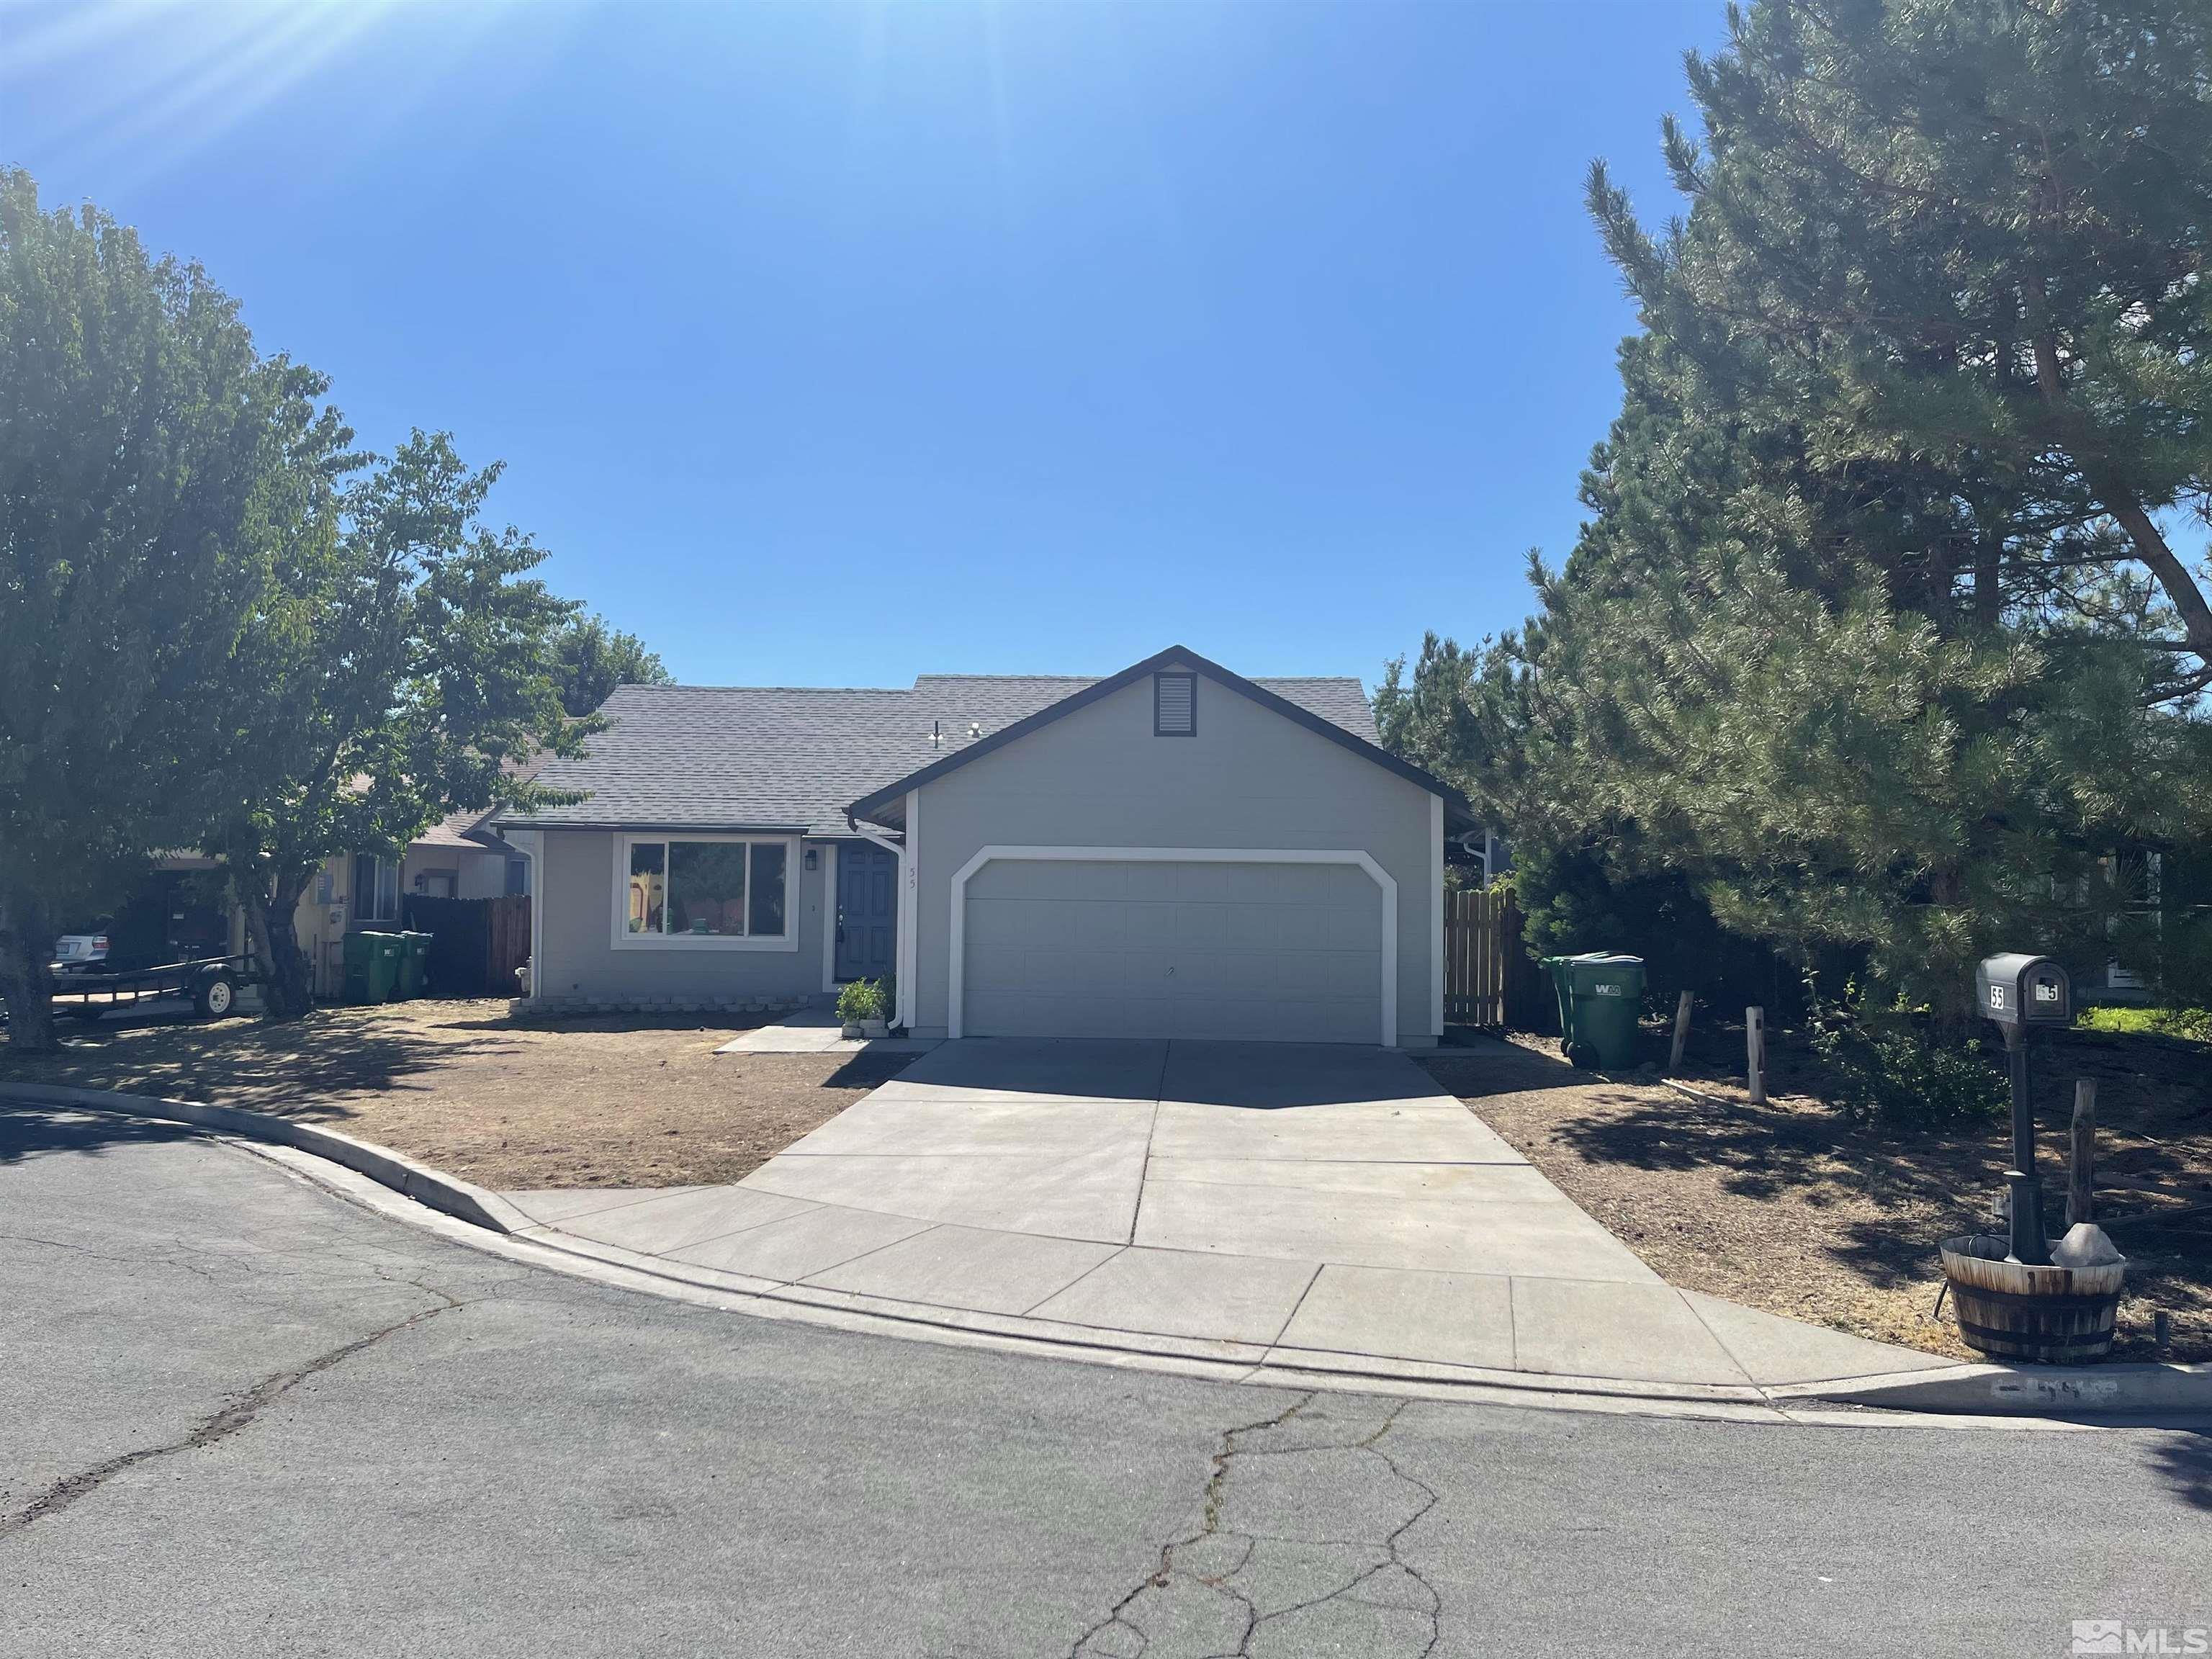 55 Shady View, Sparks NV 89436